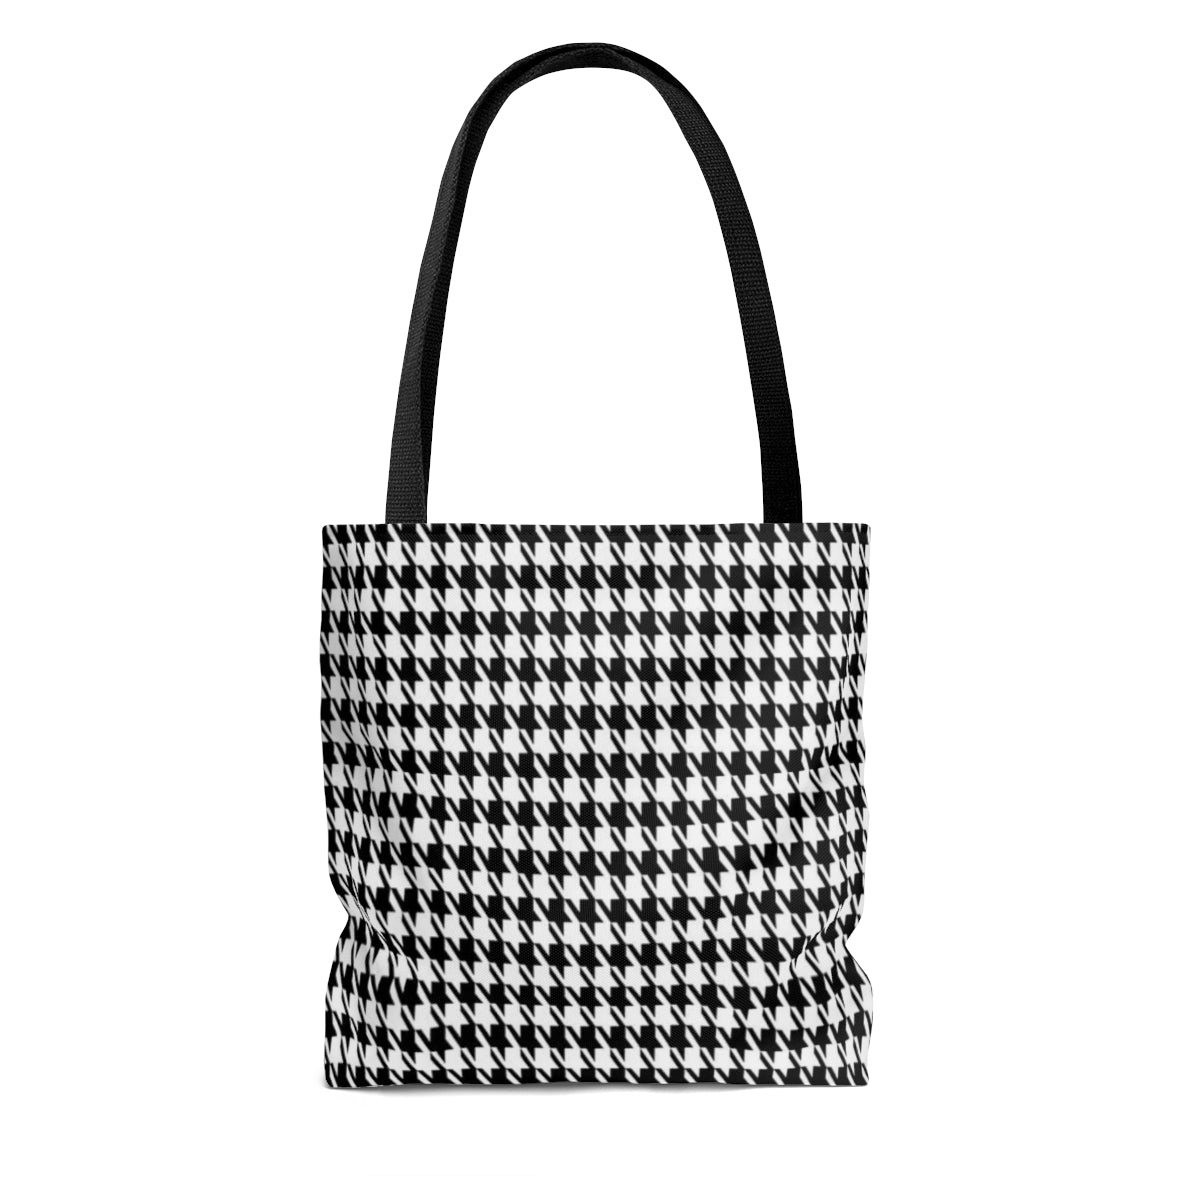 CLASSIC HOUNDSTOOTH - Tote Bag